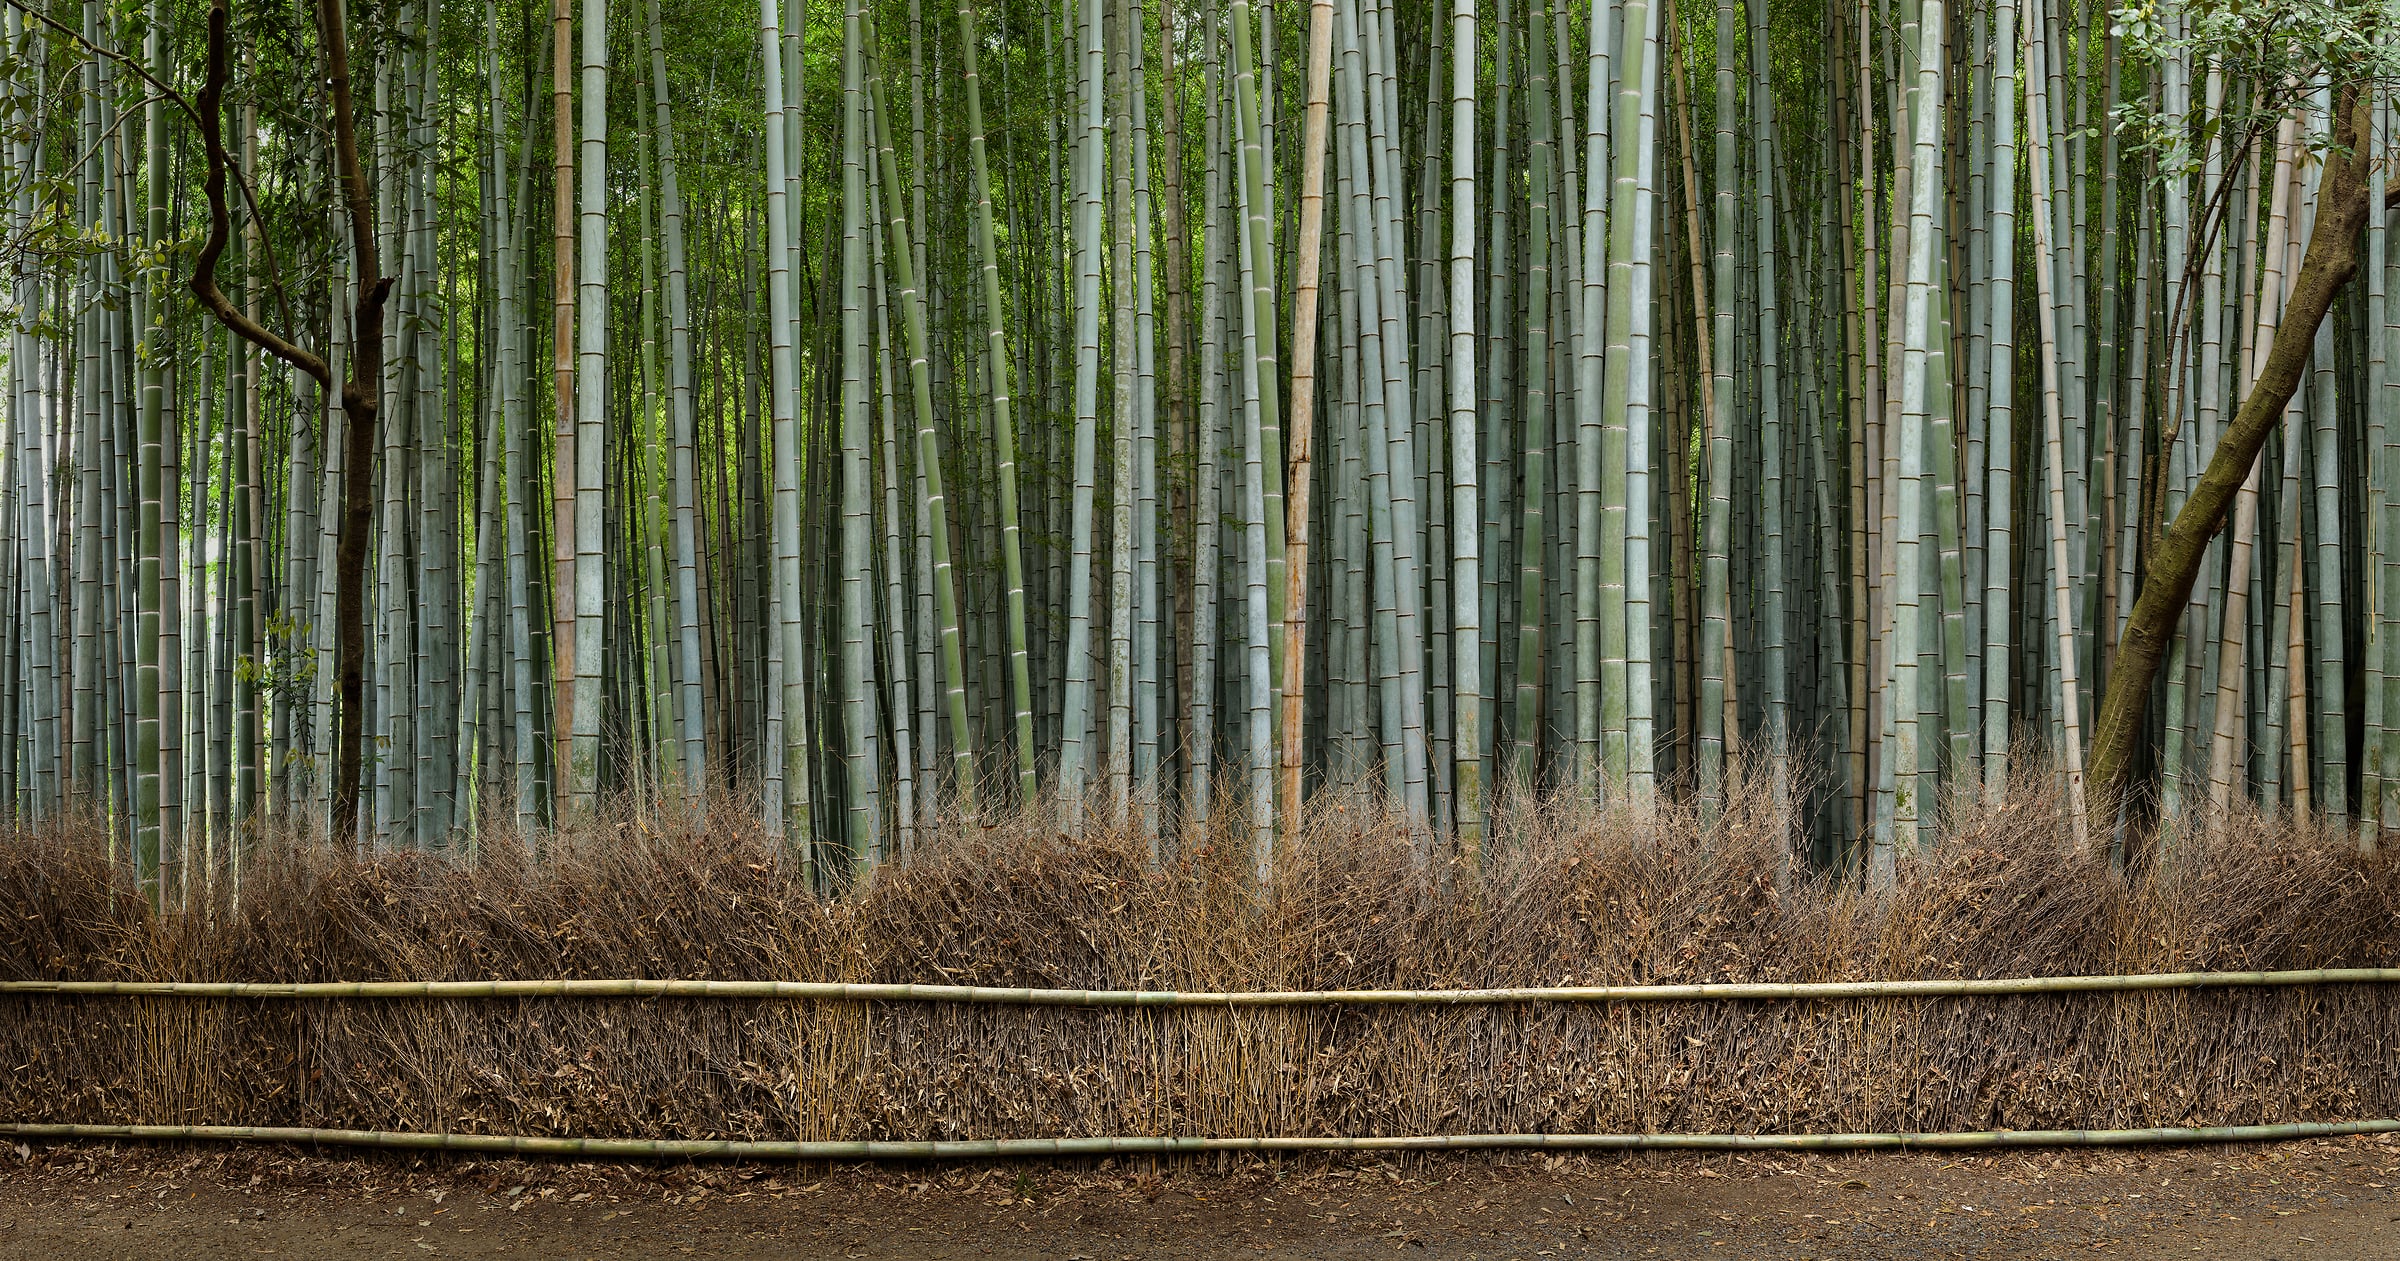 1,134 megapixels! A very high resolution VAST photo of a bamboo forest perfect for a wallpaper in a home or office; nature photograph created by Scott Dimond in Arashiyama Bamboo Grove, Ukyo Ward, Kyoto, Japan.